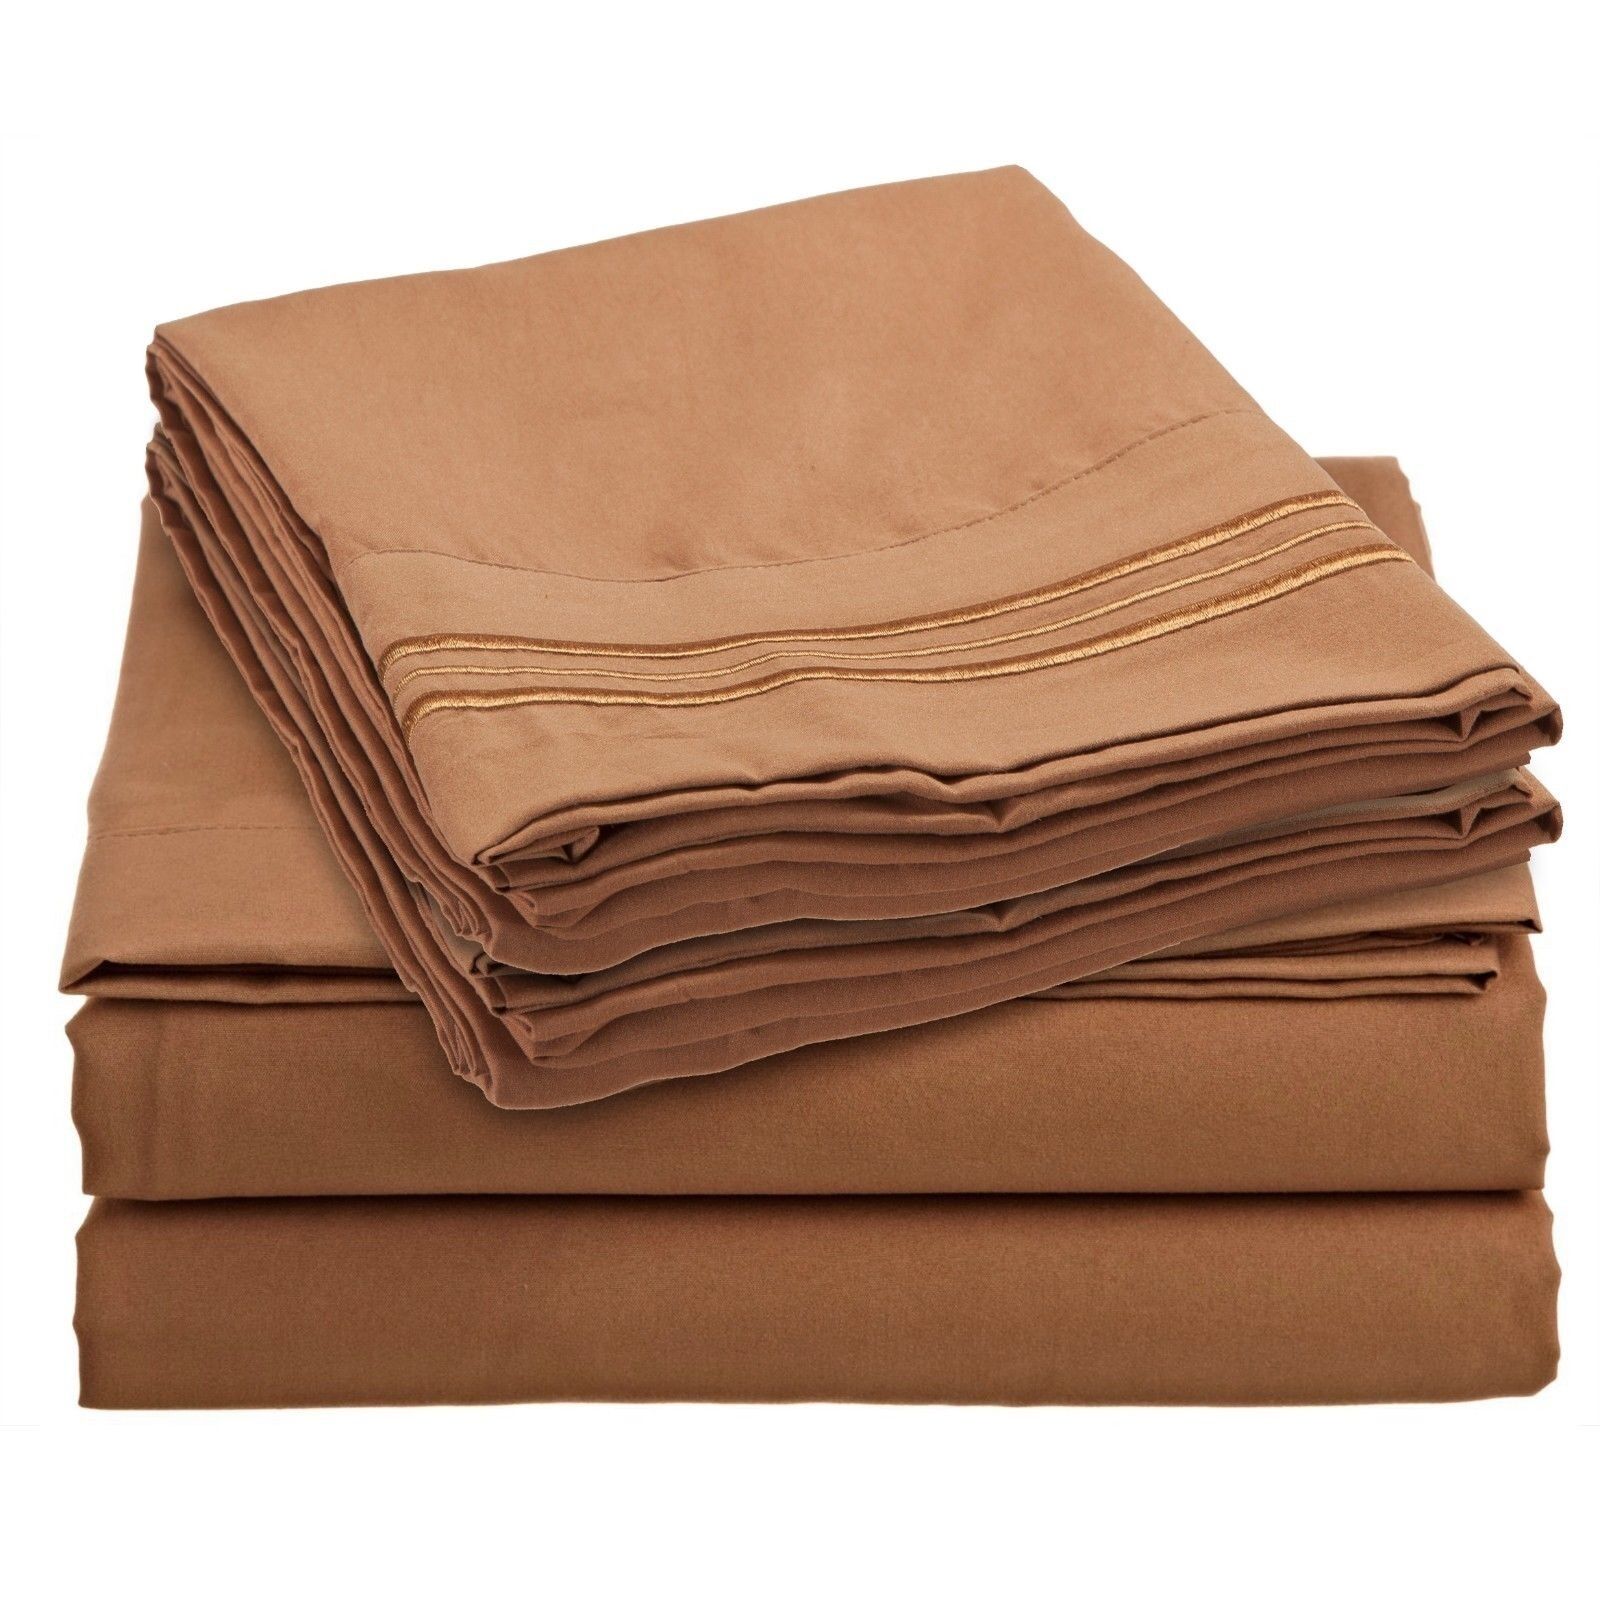 Bed Sheets - Deep Pocket Bed Sheets- 4 Piece Set, Queen, King, Twin, or Full Size - King / Light Brown Mocha